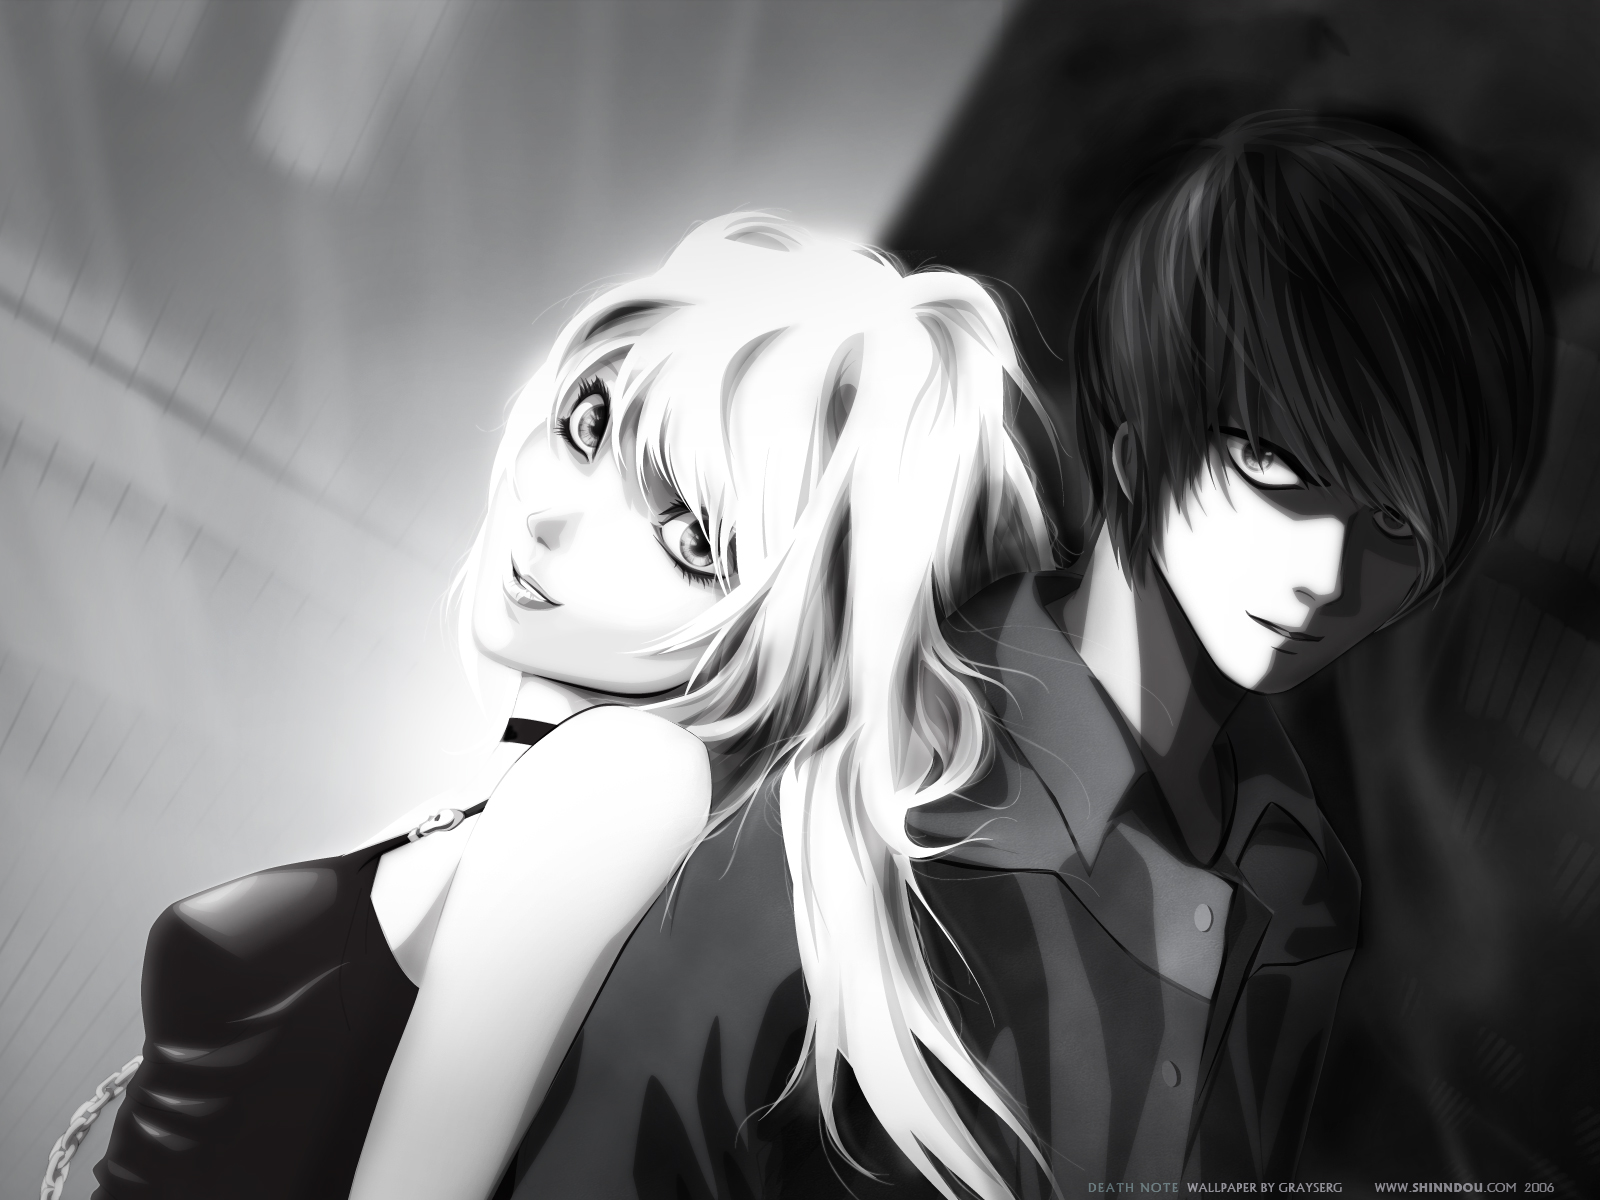 Pin by syd on anime / manga  Death note fanart, Anime, Aesthetic anime